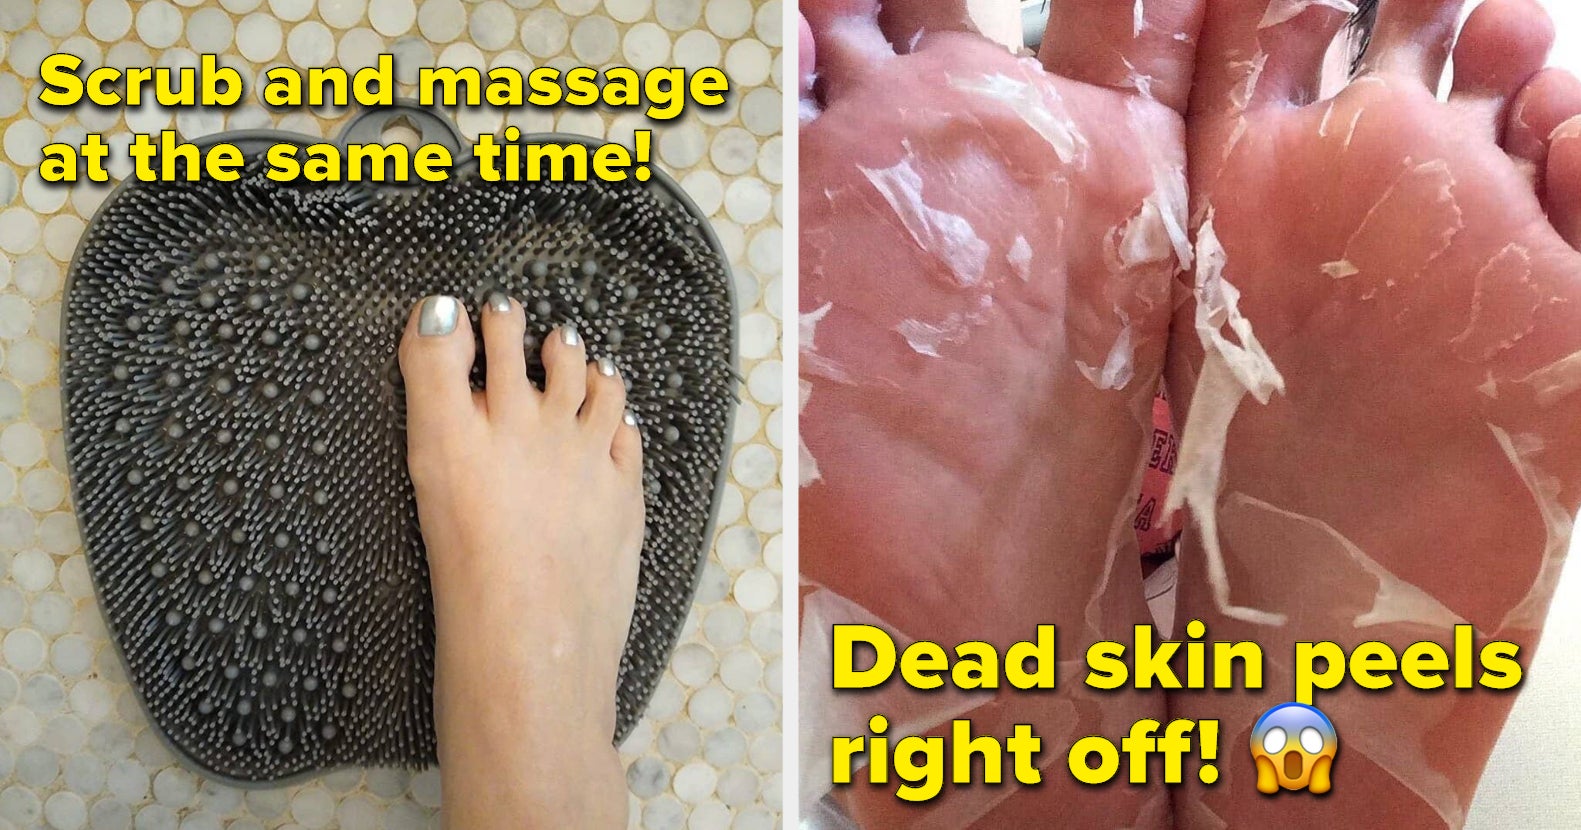 This $8 Pedicure Rasp Will Give You Disgustingly Satisfying